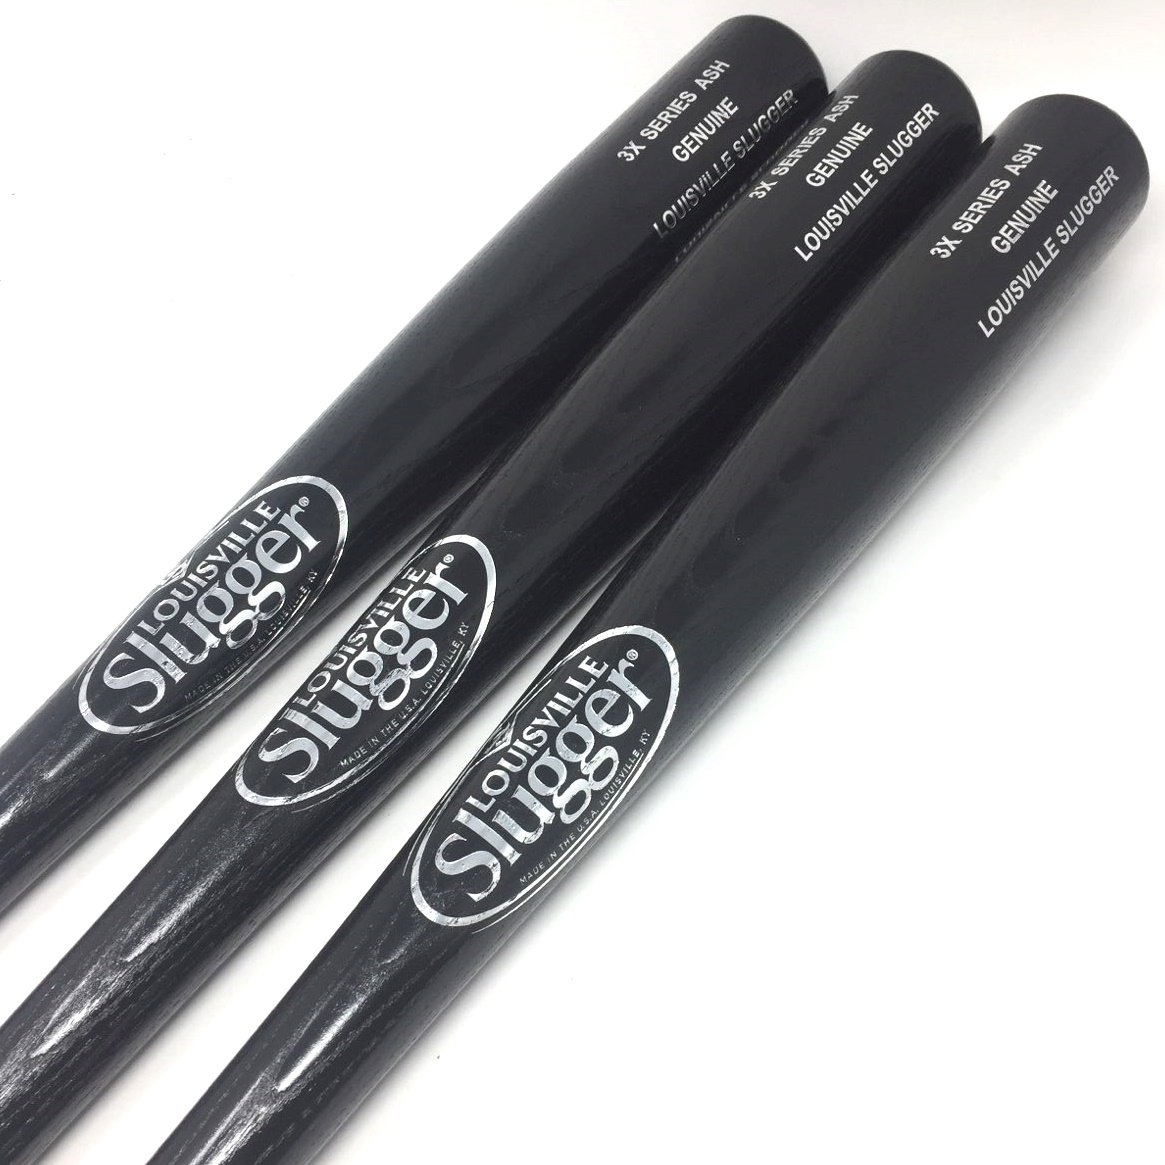 33 inch wood baseball bats by Louisville Slugger. Series 3 Ash Wood. 33 inch. Cupped. 3 bats in this bat pack.